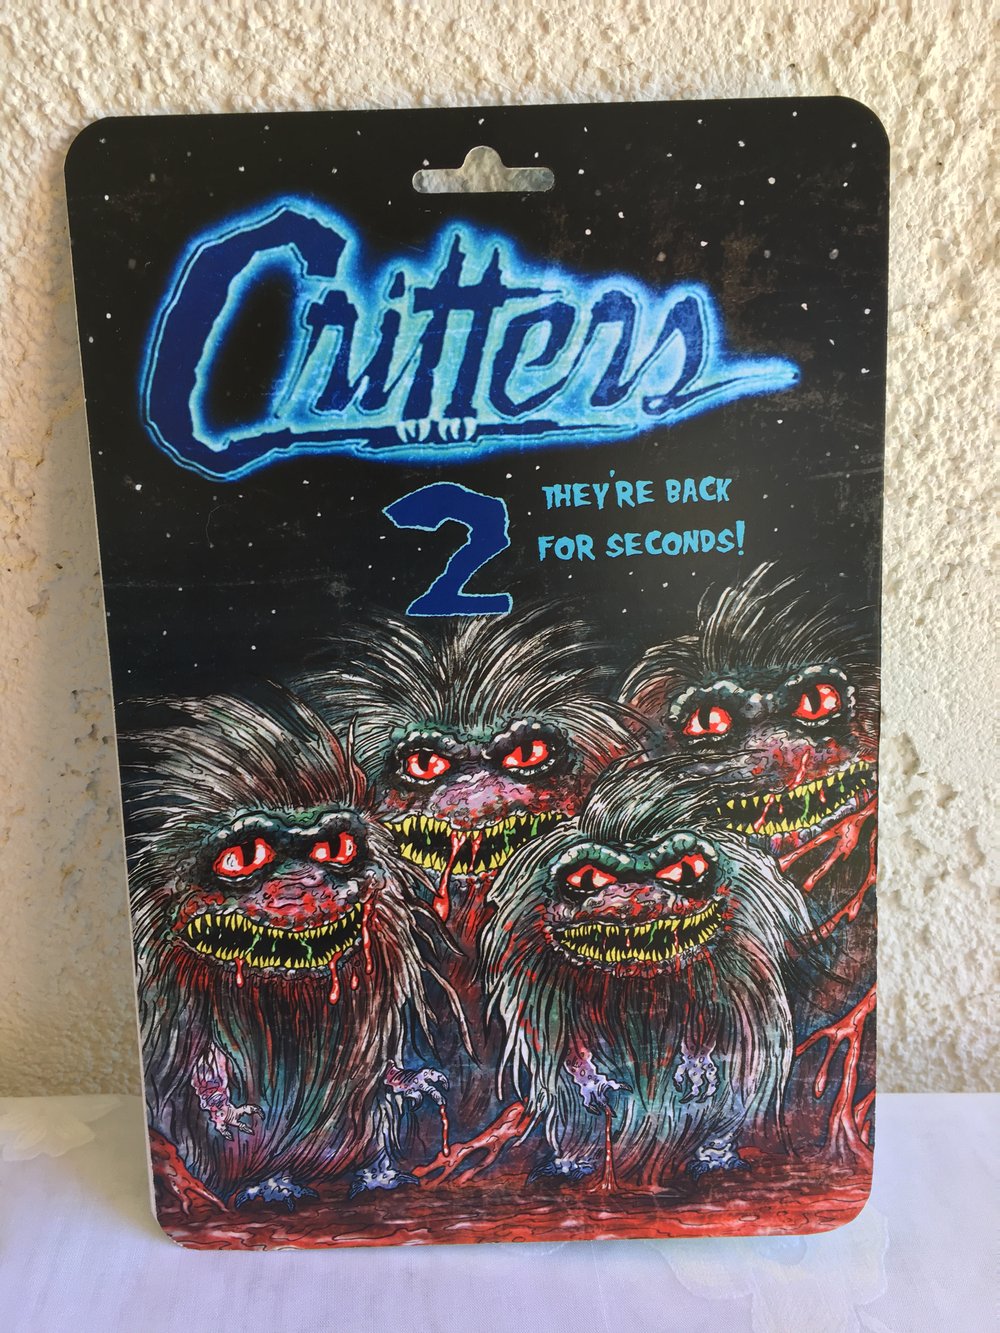 Custom carded Easter Bunny figure from Critters 2